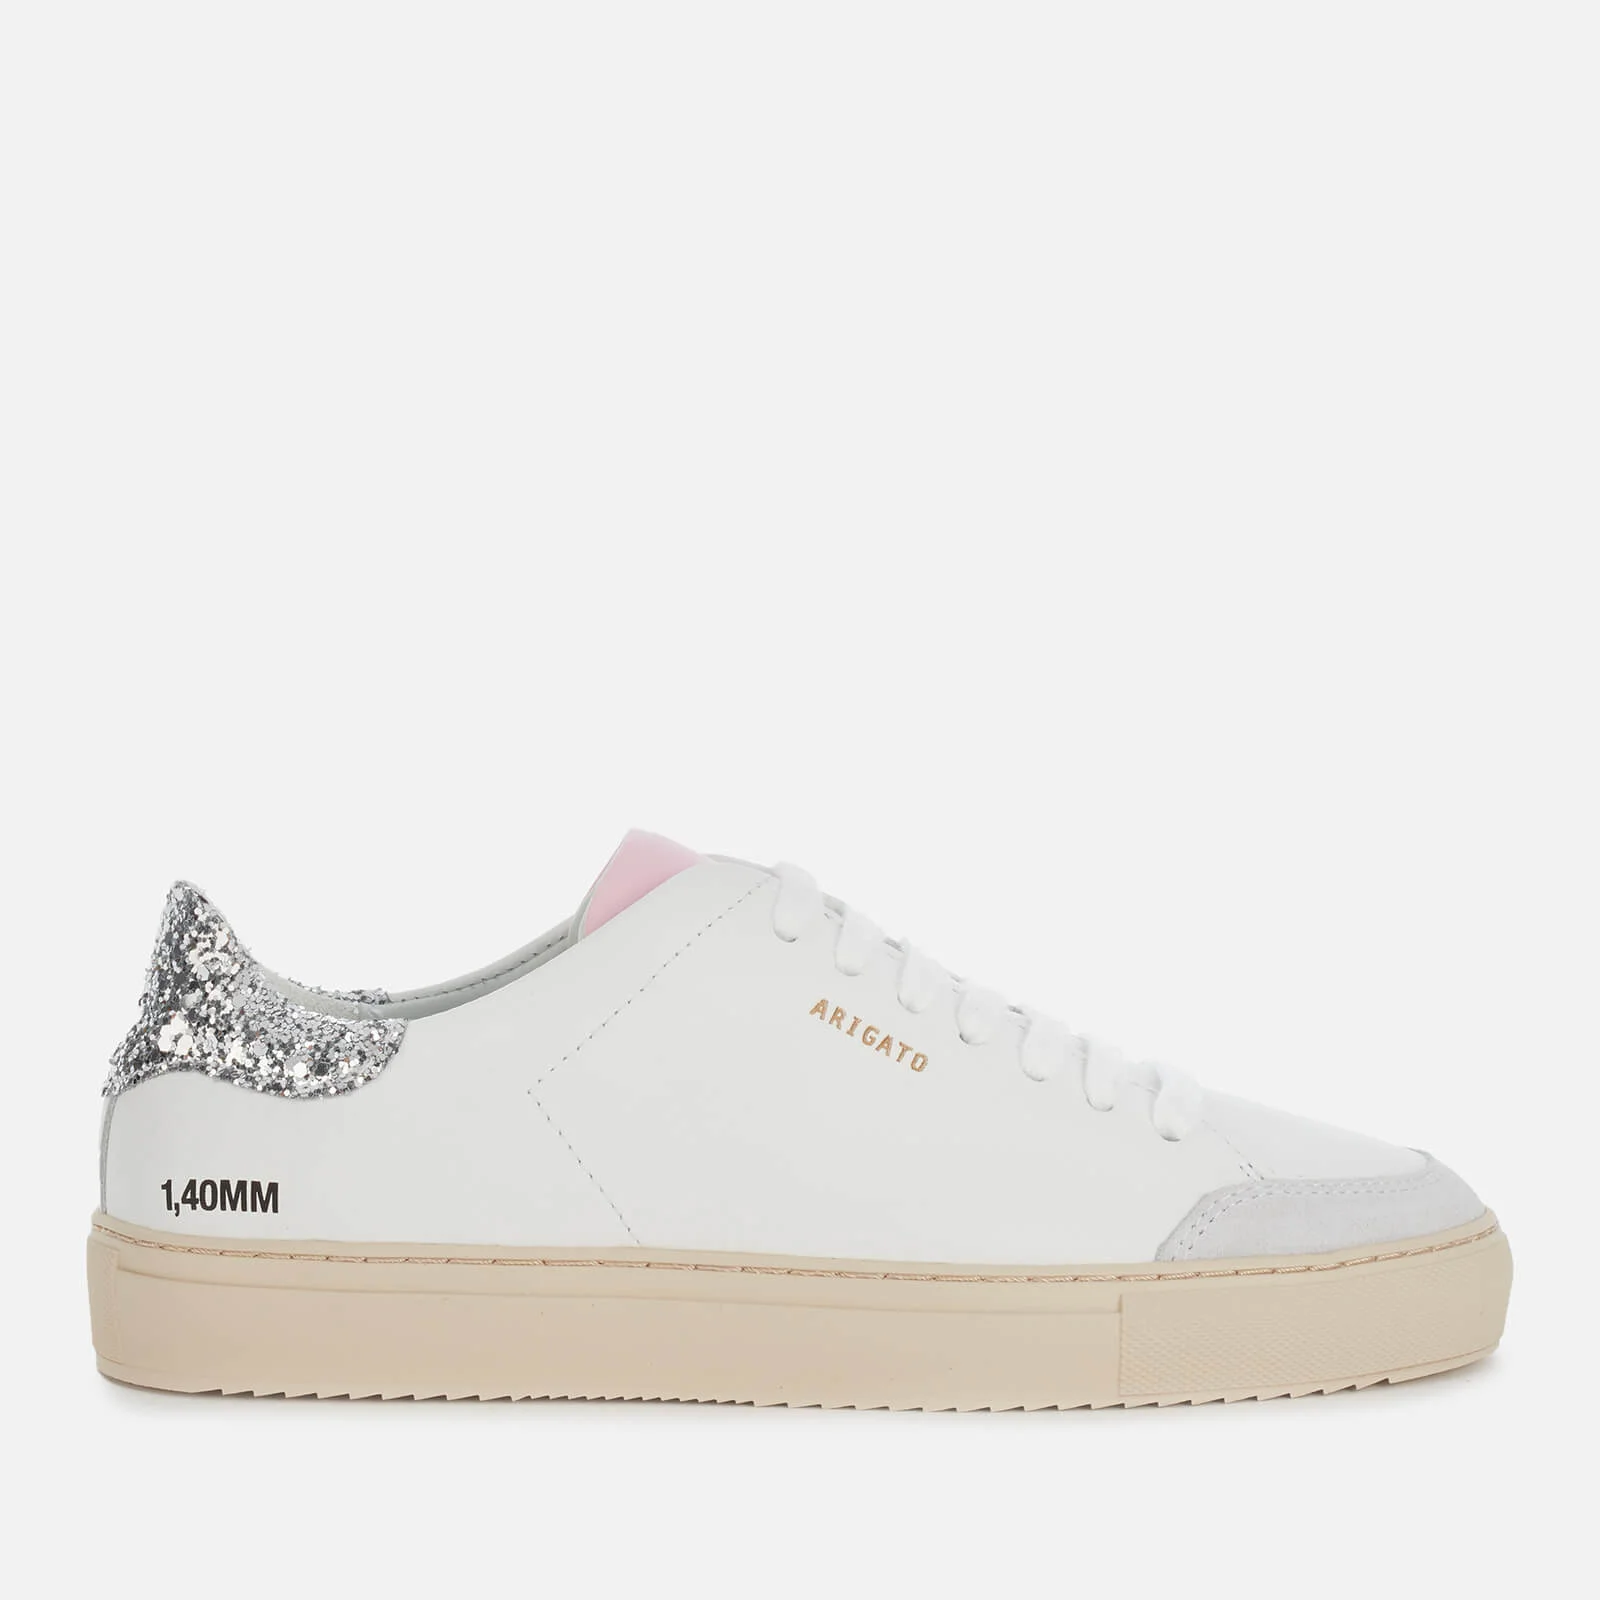 Axel Arigato Women's Clean 90 Triple Glitter Leather Cupsole Trainers - White/Silver/Pink Image 1